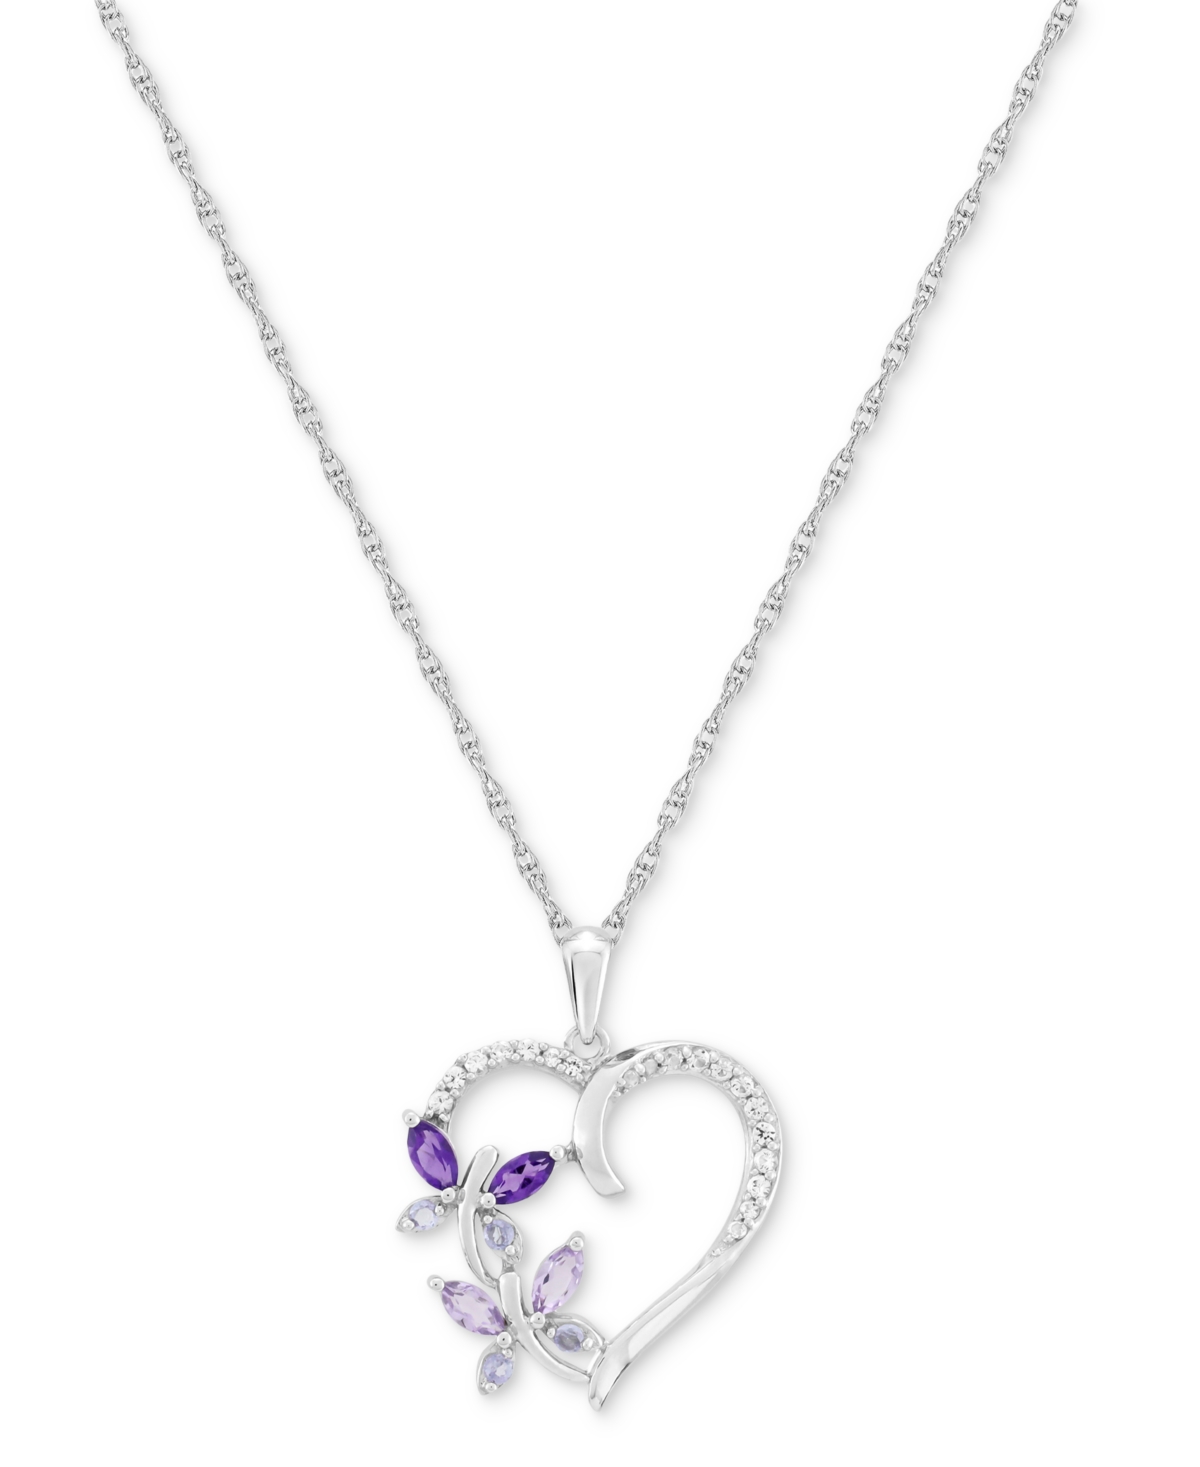 Multi-Gemstone Butterfly Heart 18" Pendant Necklace (1/2 ct. t.w.) in Sterling Silver (Also in Additional Gemstones) - Green